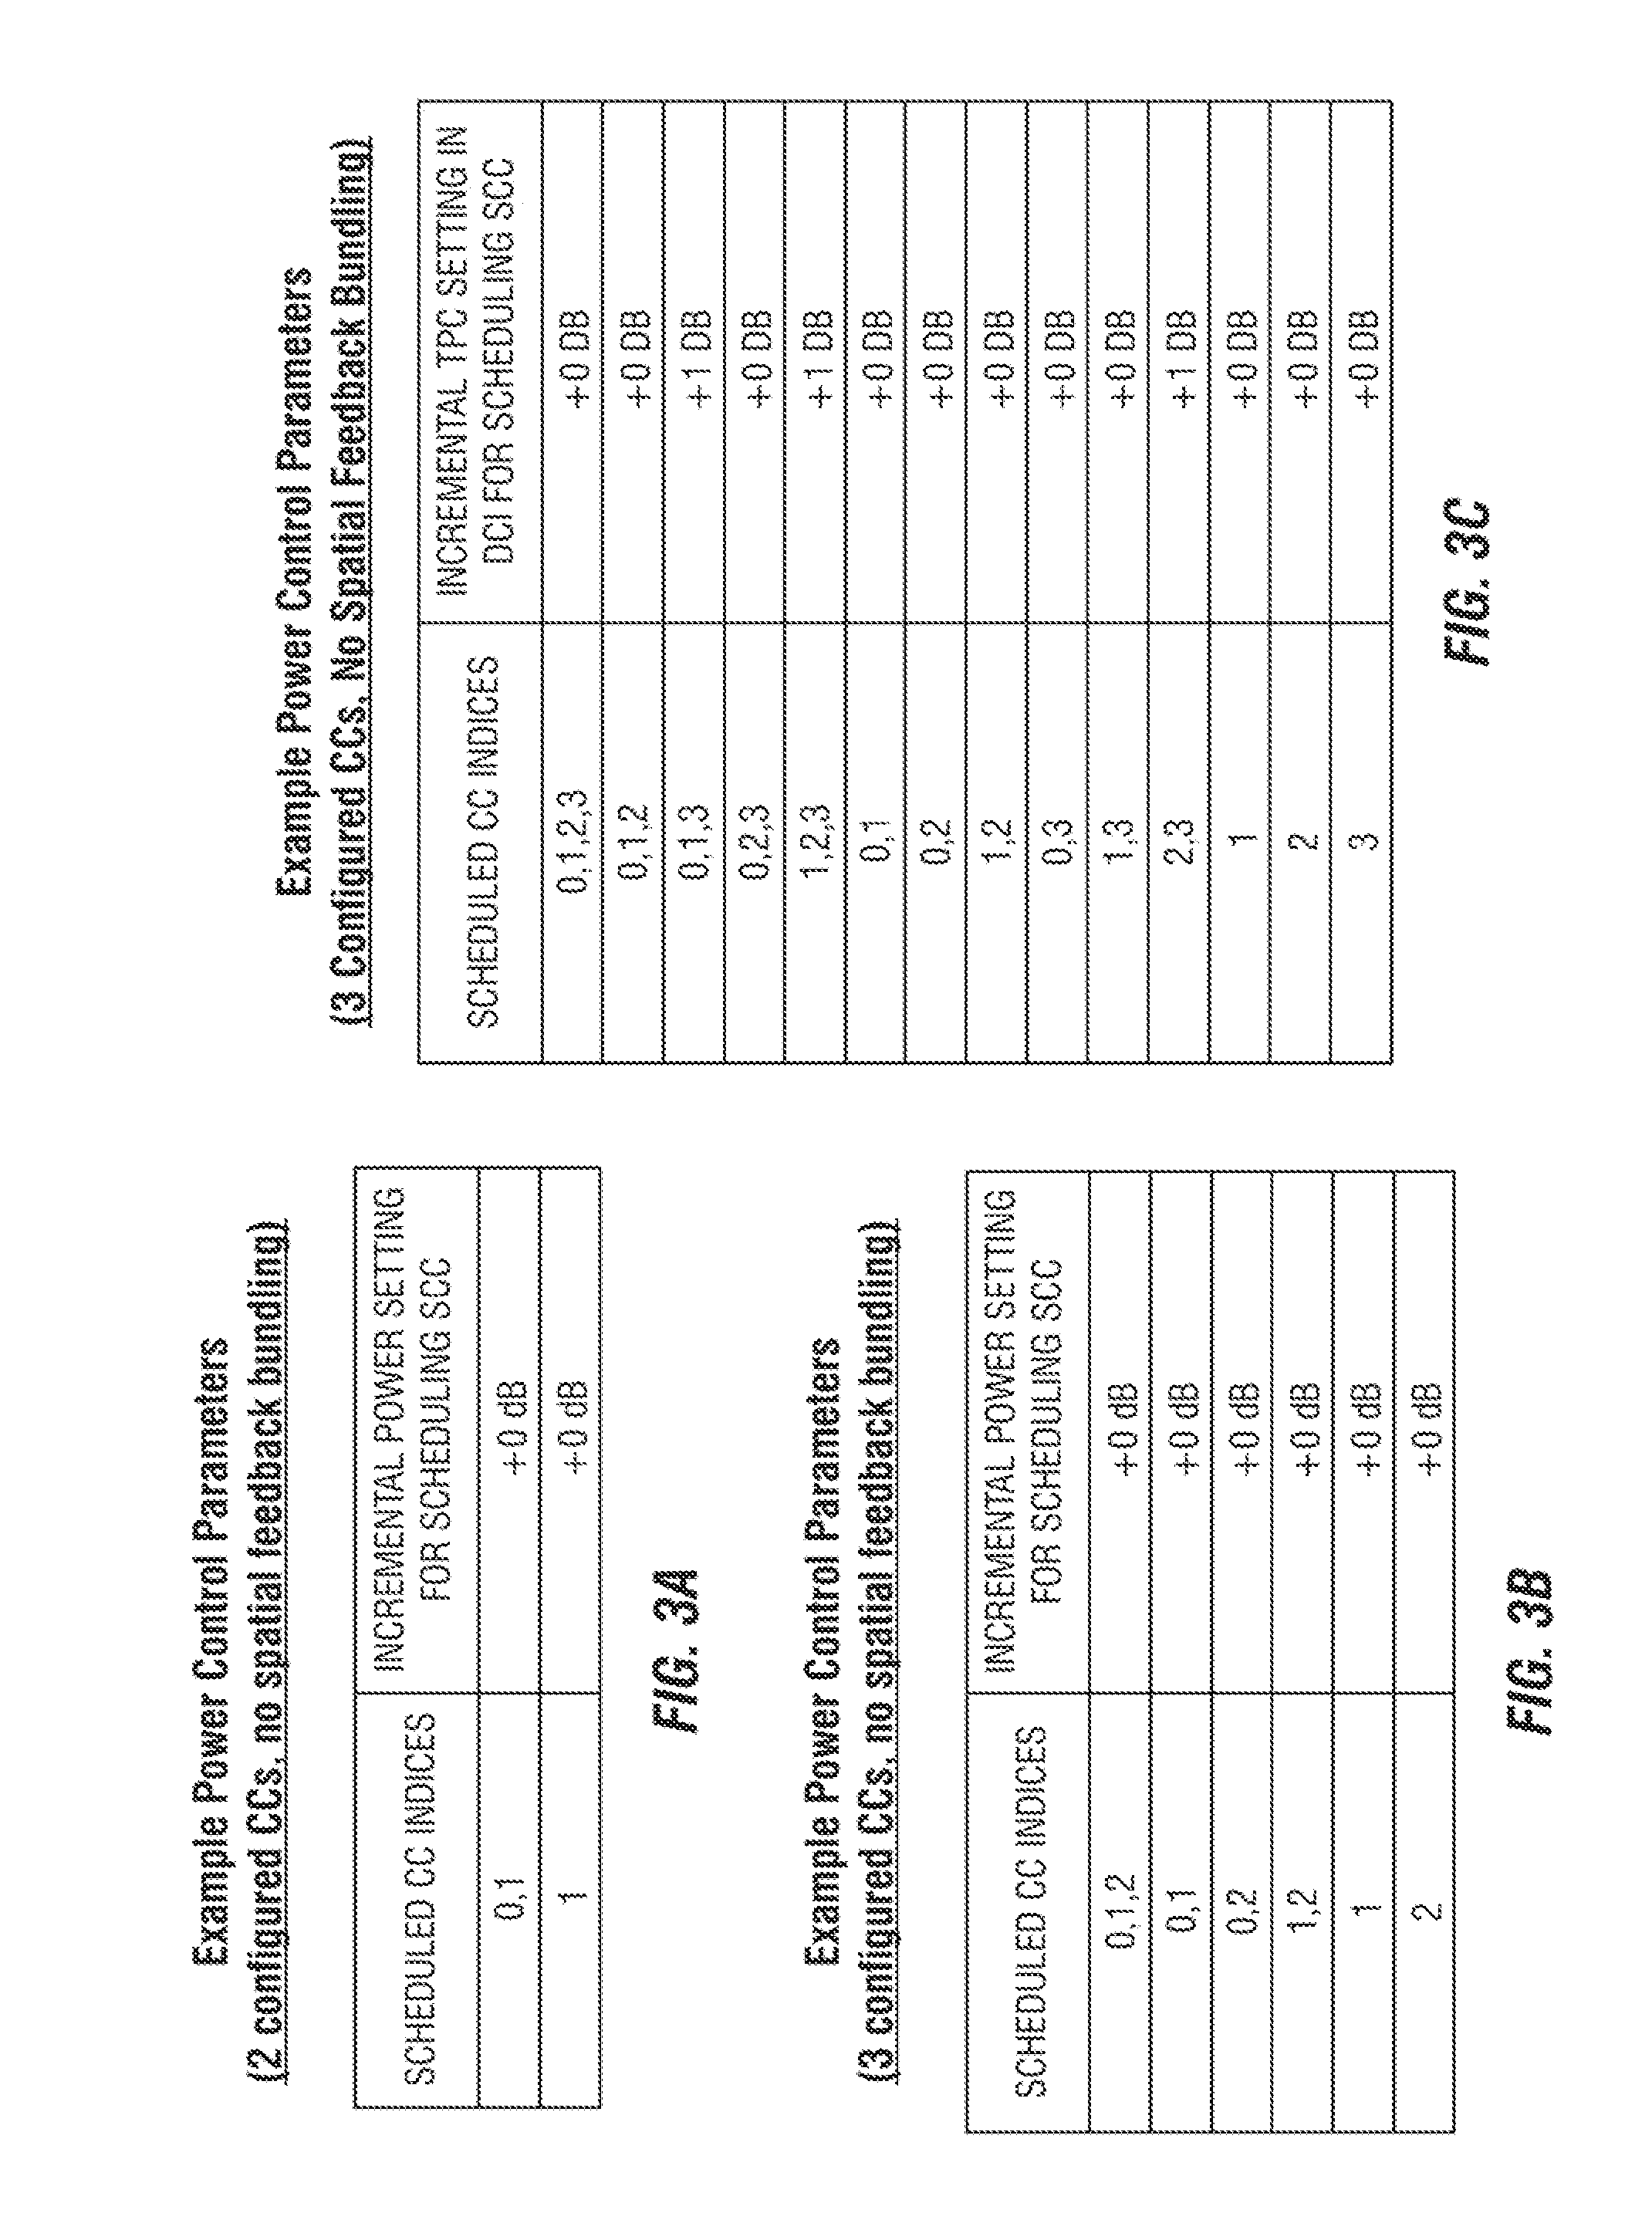 System and Method for Signaling Control Information in a Mobile Communication Network